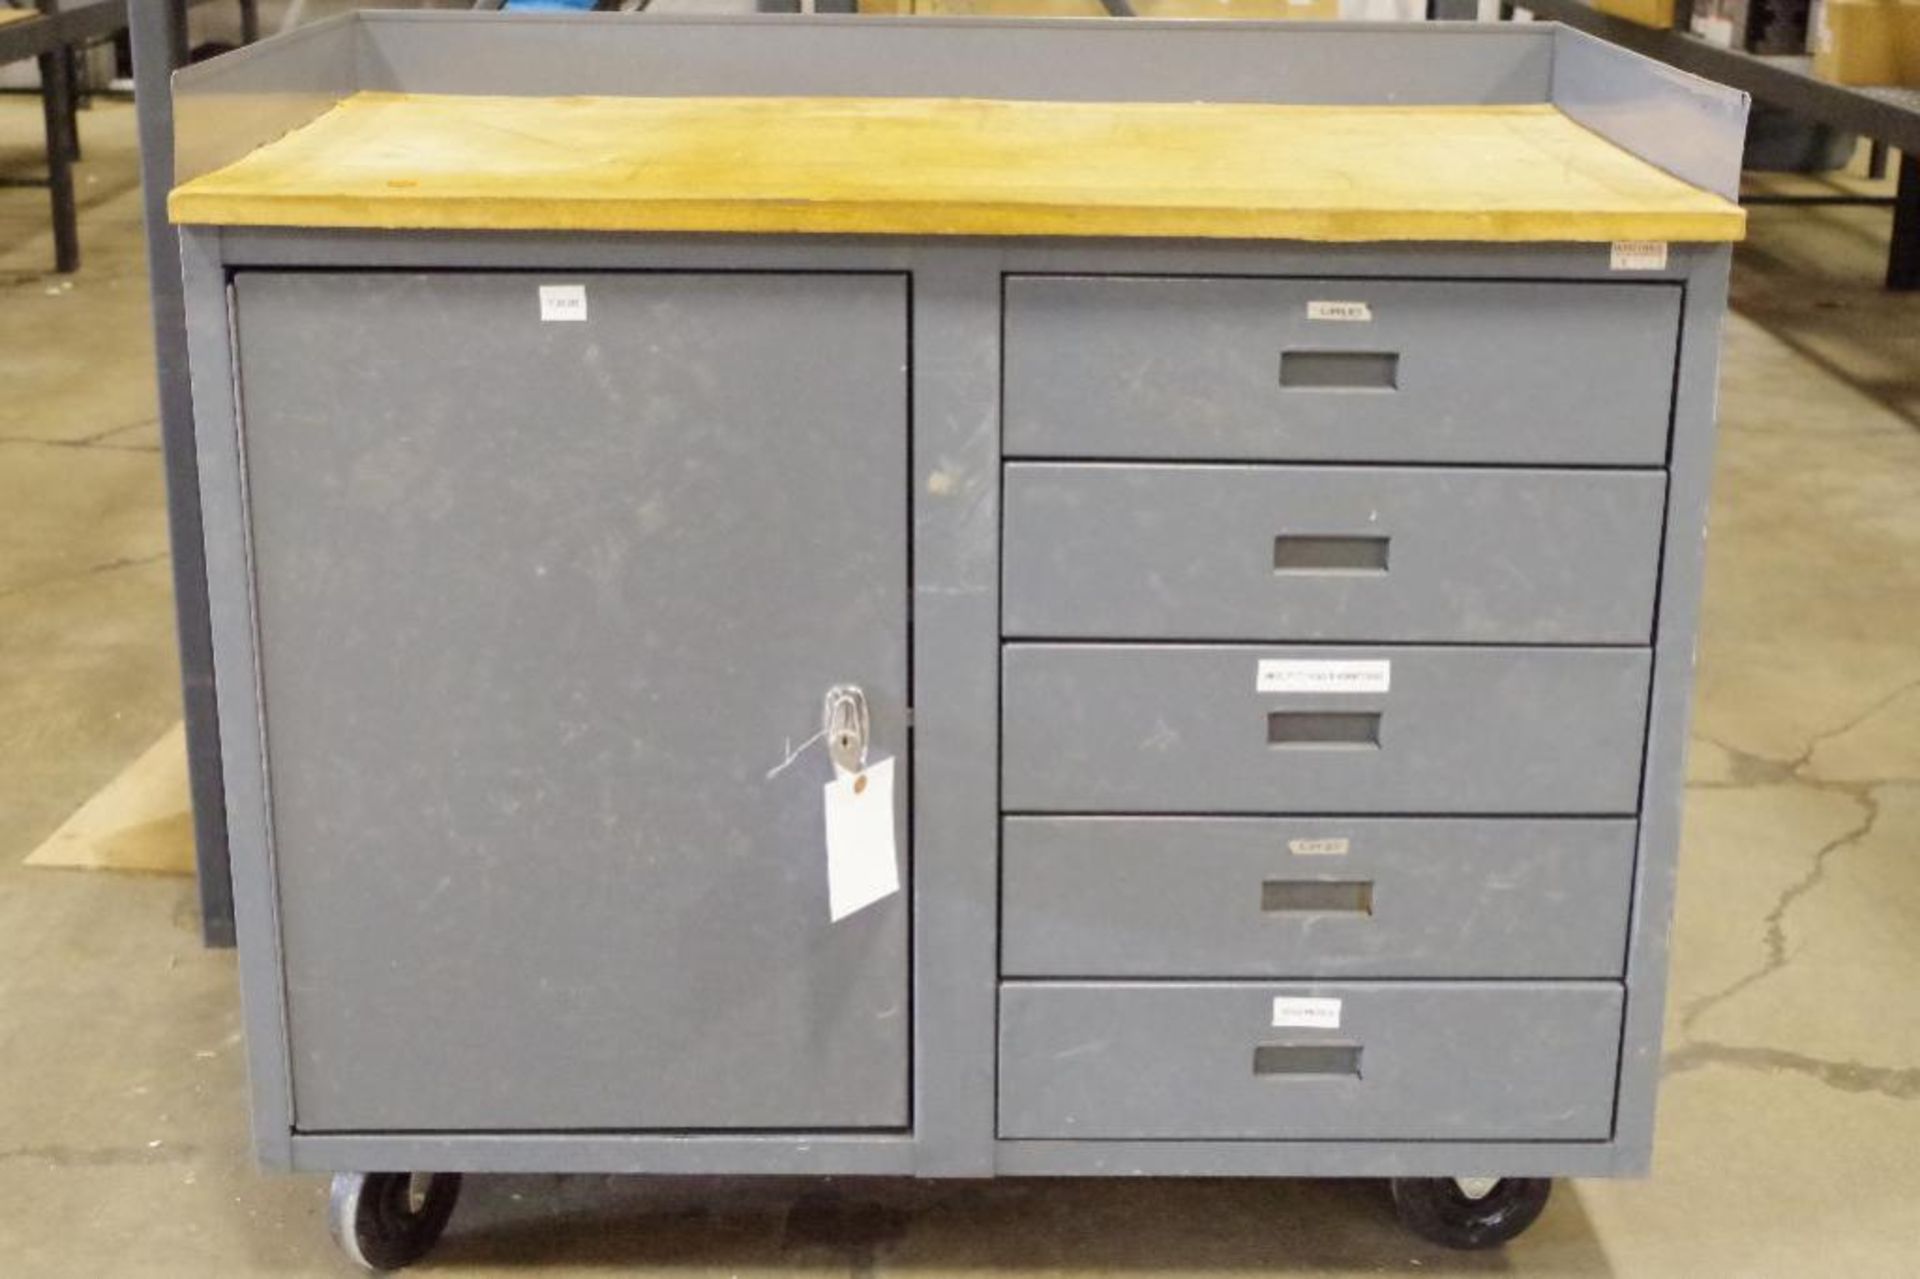 Rolling Metal Shop Desk w/ Cabinet, 5-Drawers (NO Key for Cabinet Handle) - Image 2 of 4